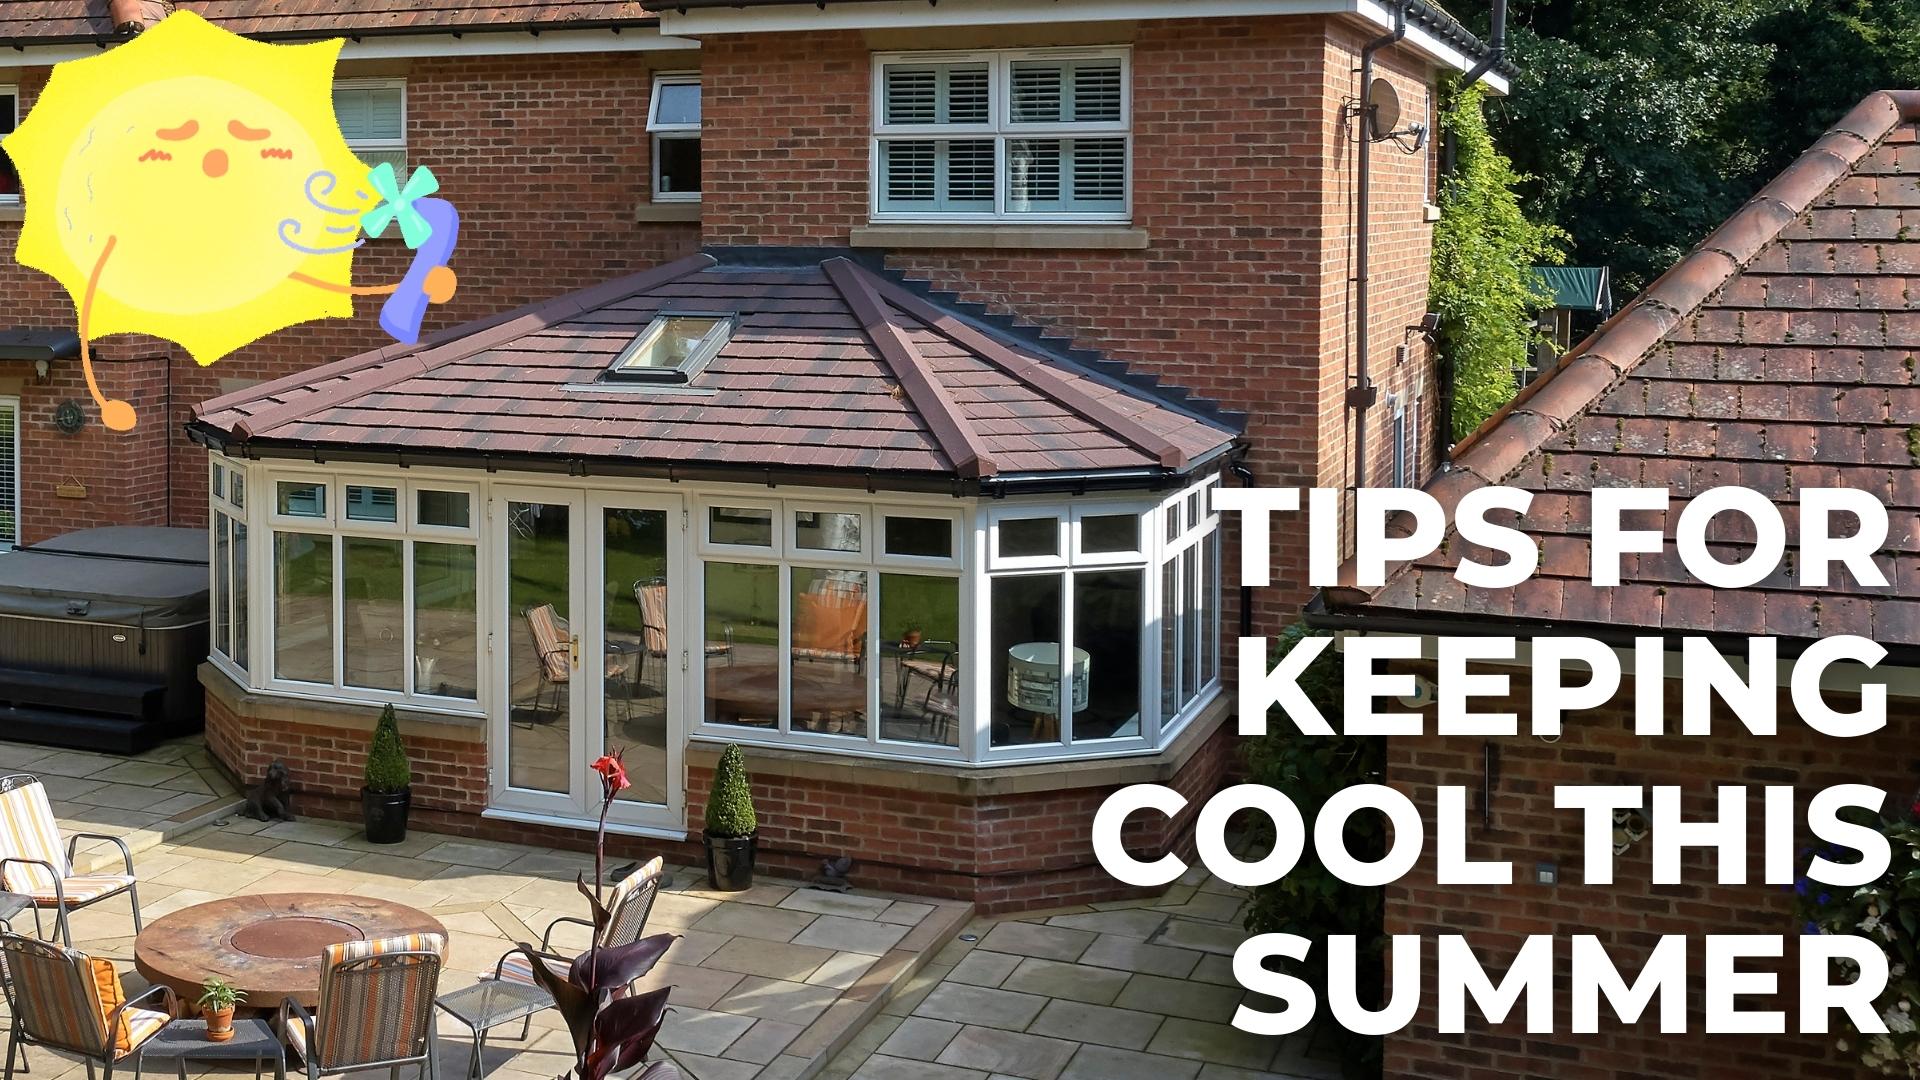 How do you keep yourself and your home cool in hot weather?